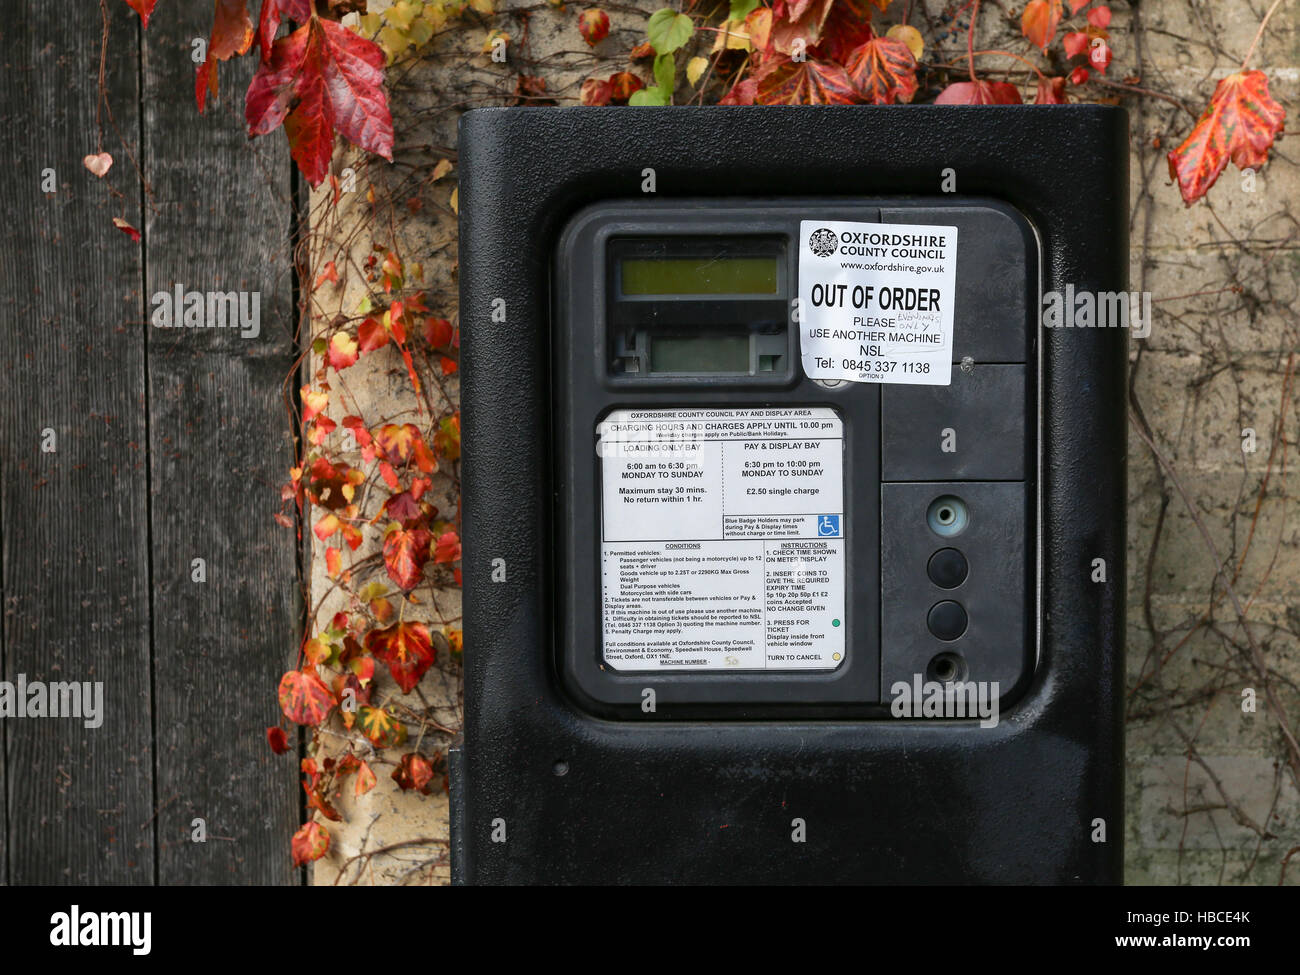 Broad Street, Oxford, United Kingdom, December 04, 2016: Oxford parking meter with Out of order notice sticker and additional hand written notice on Broad Street, Oxford. Stock Photo